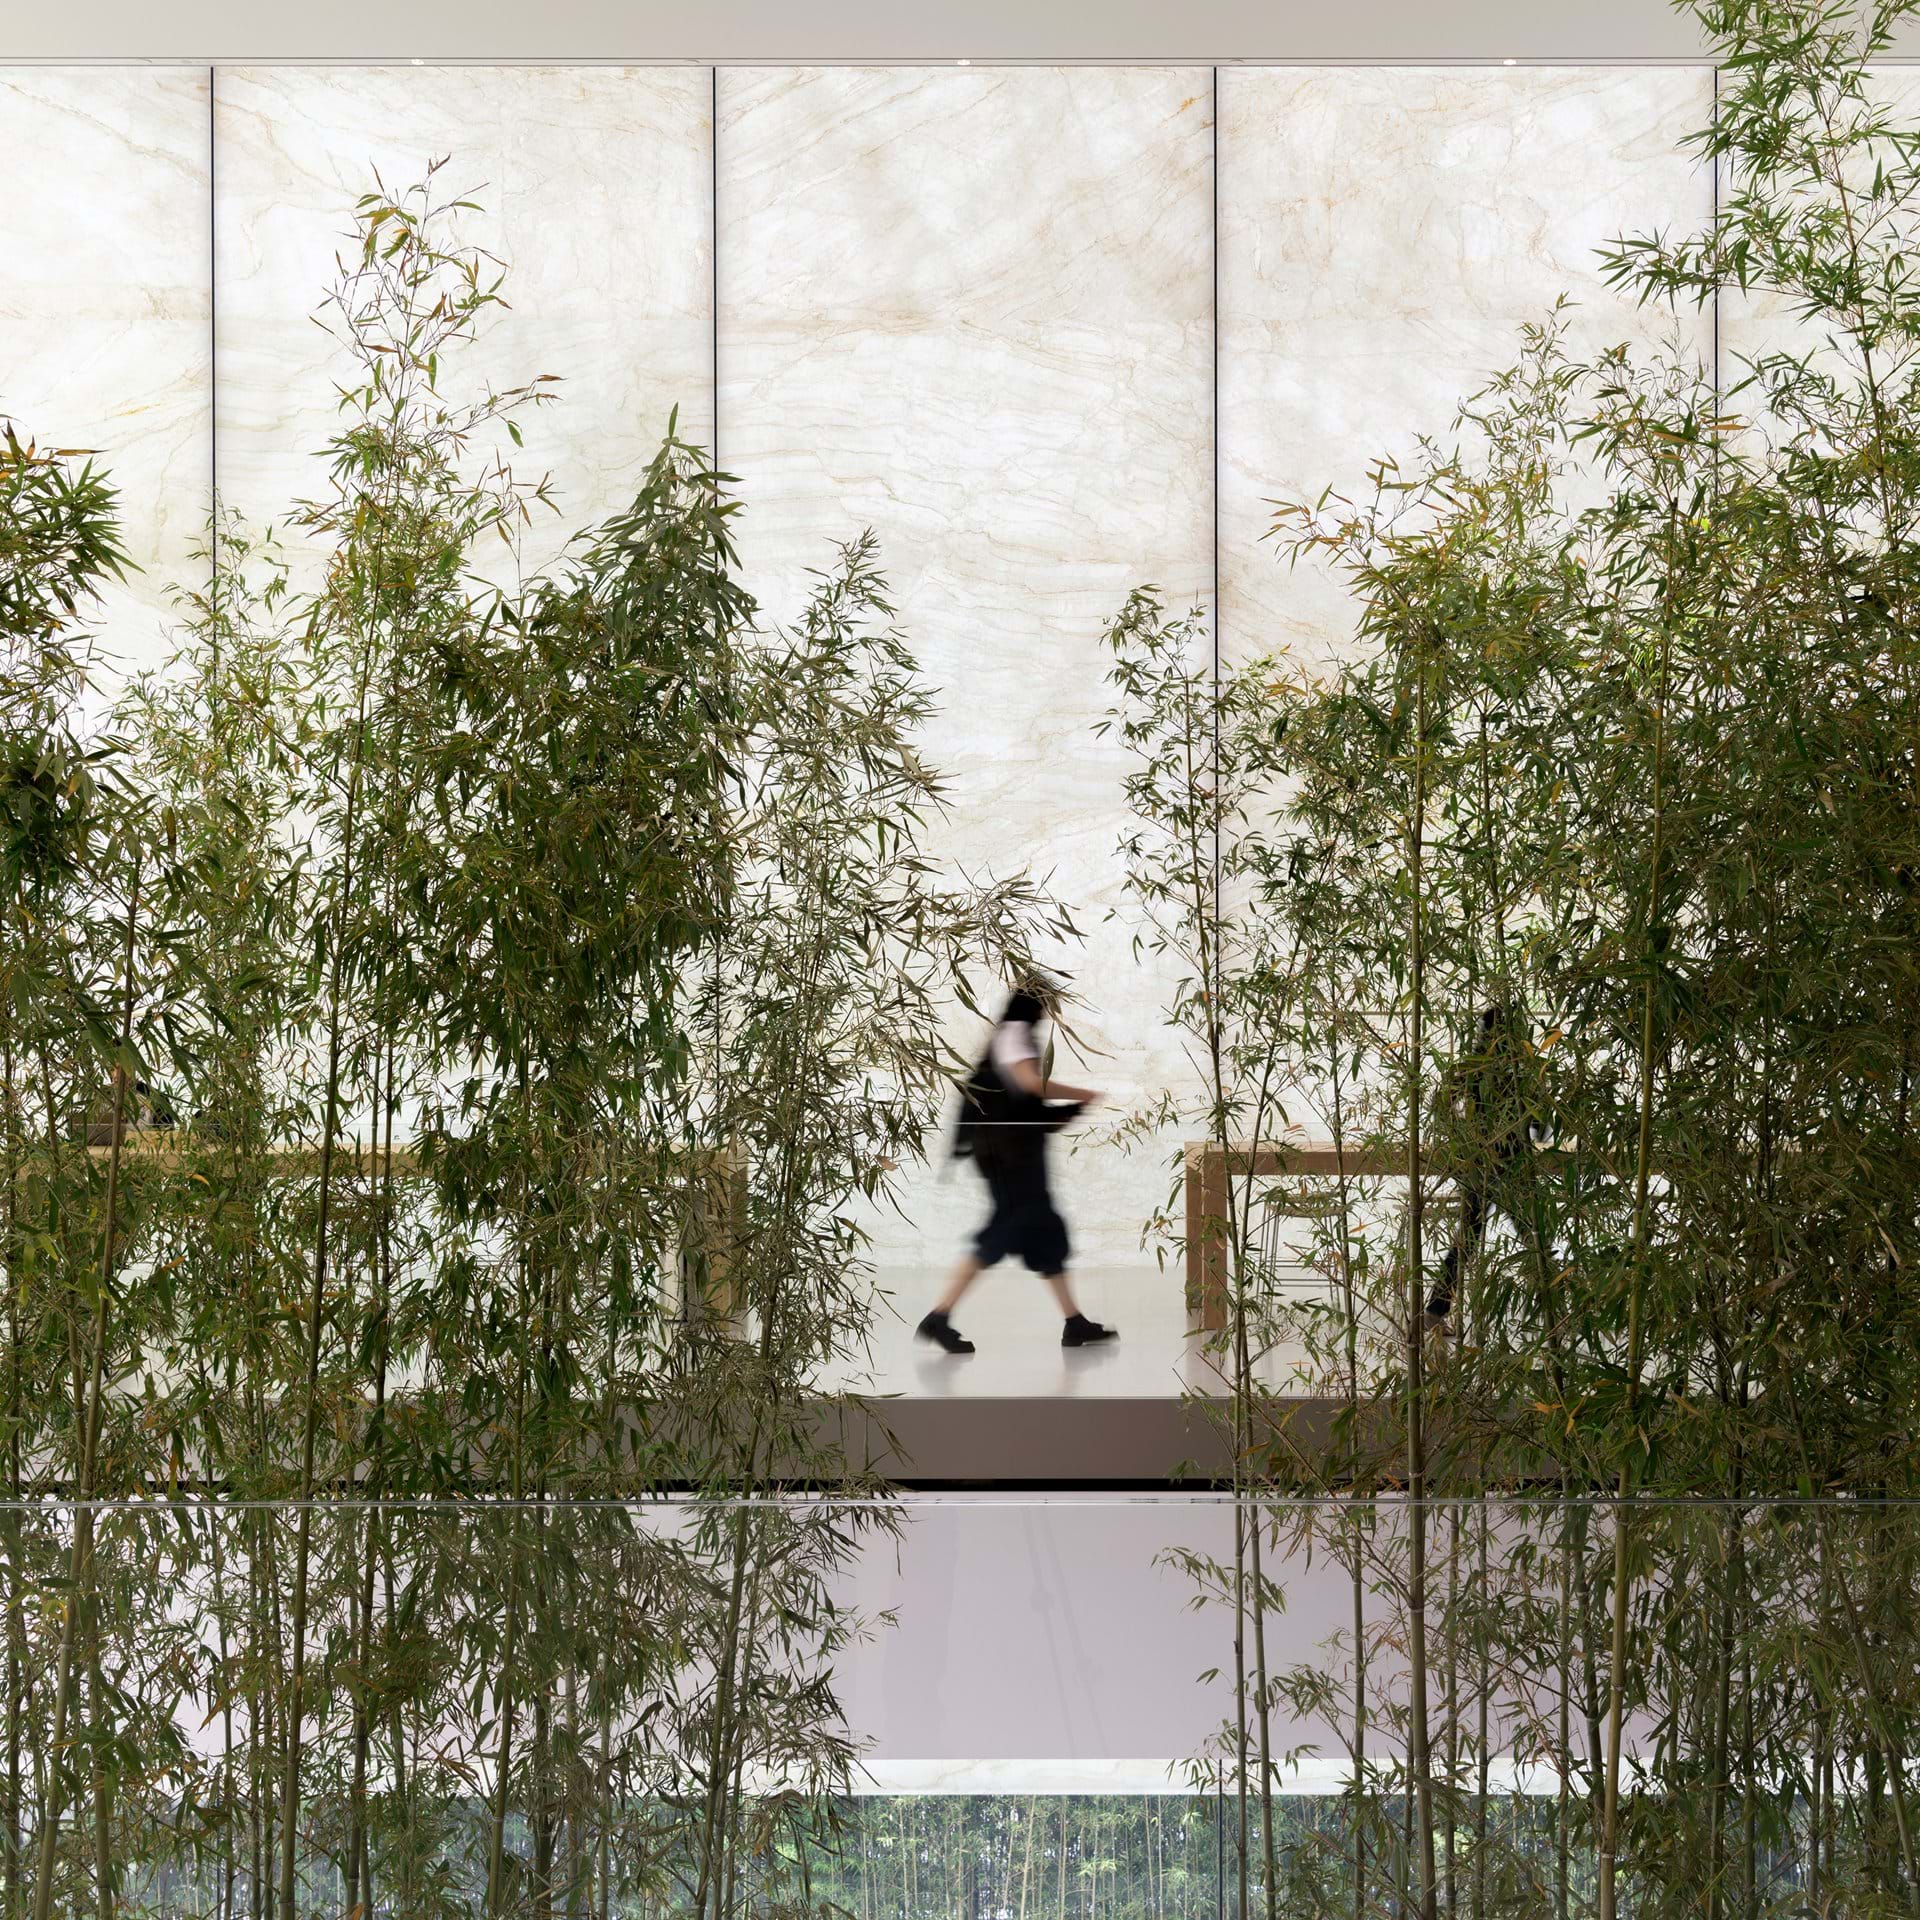 A visitor walks past bamboo plants 